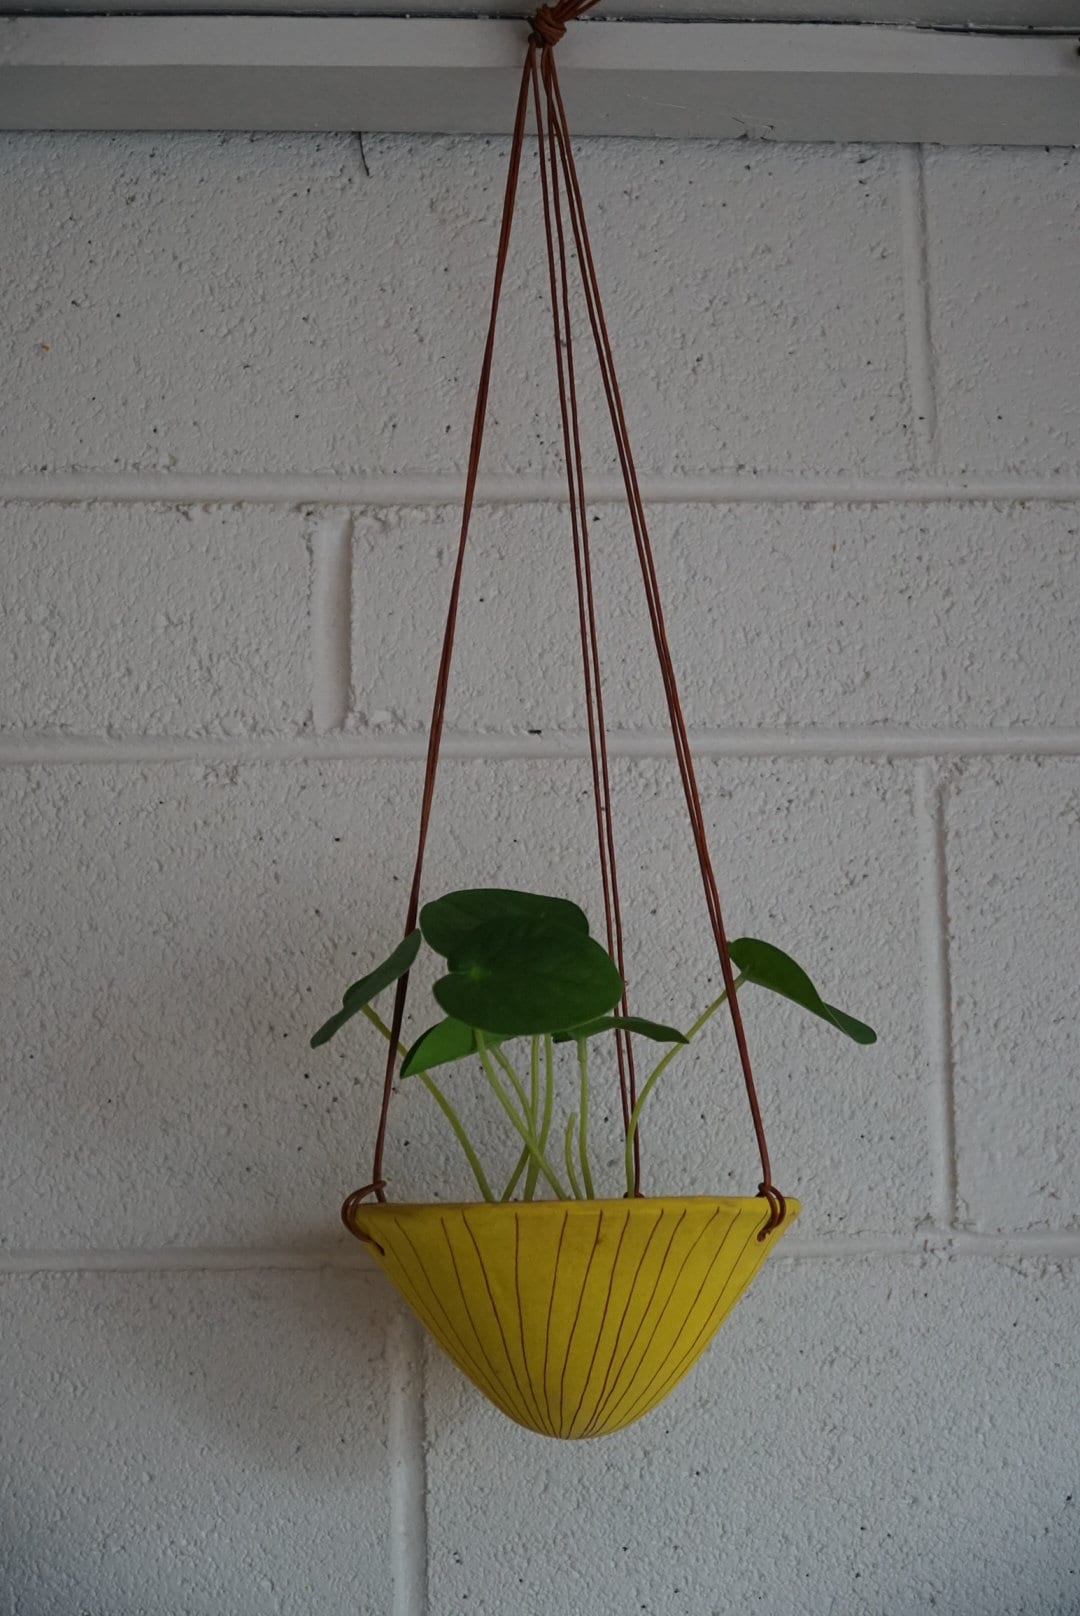 Bright Yellow & Terracotta Hanging Planter w/ Carved "Vertical Line" Design / Ceramic Hanging Pot / Pottery / Succulent / Houseplant